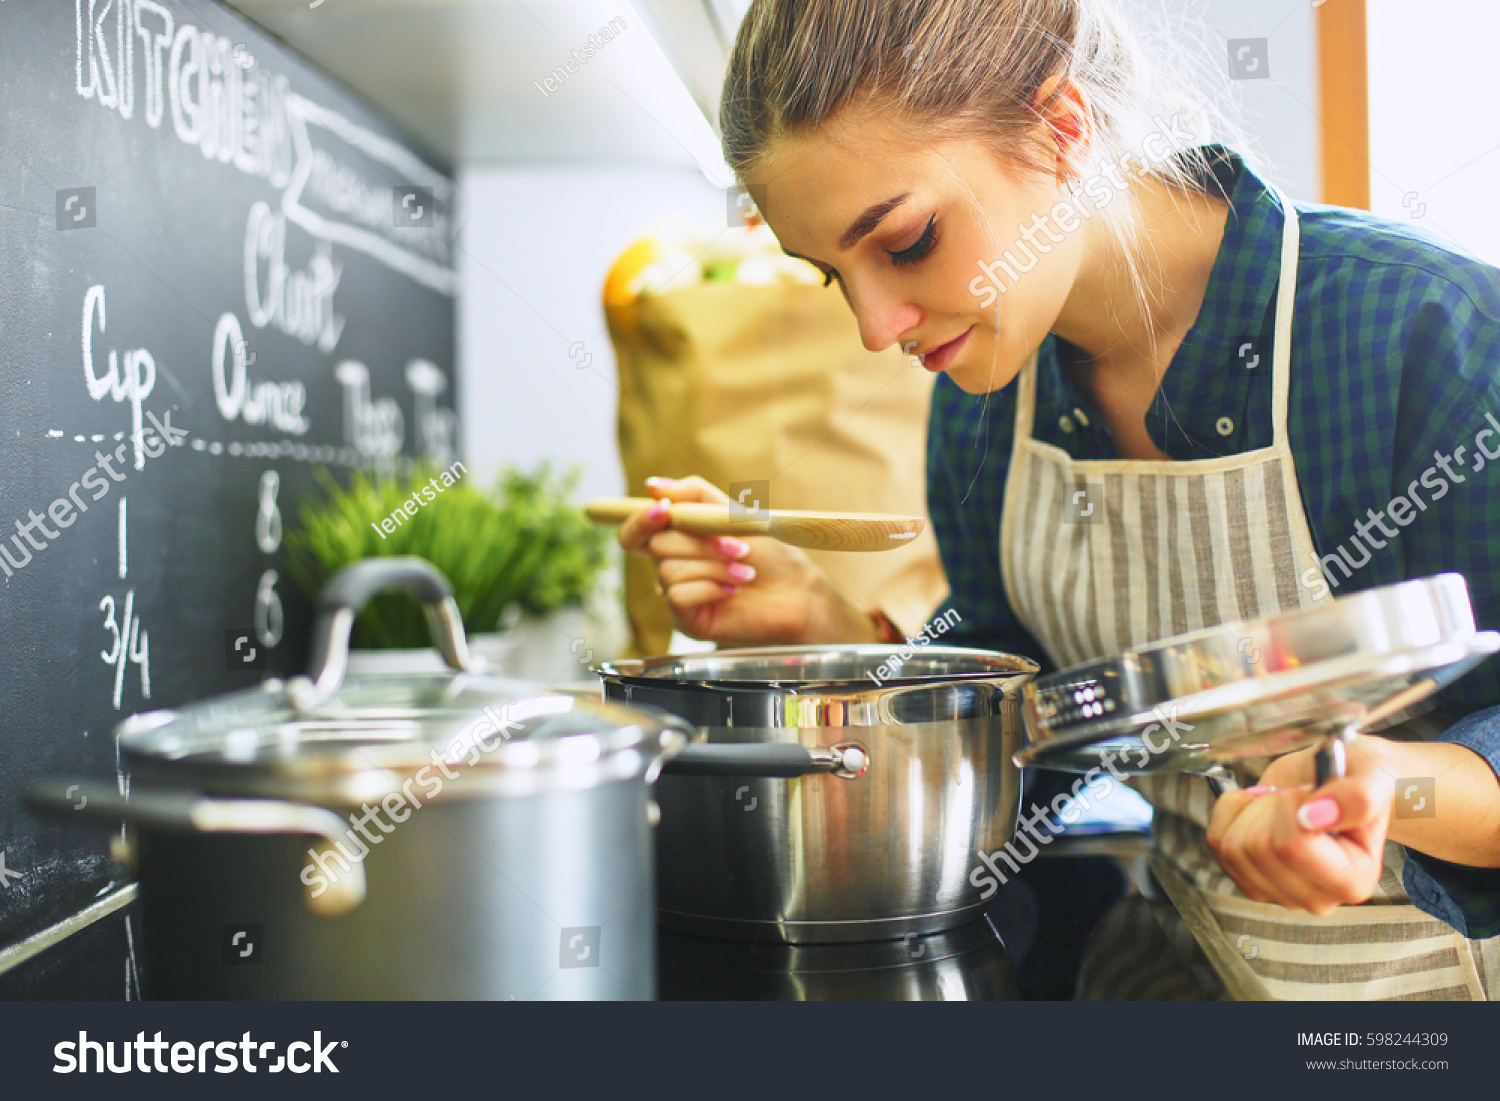 Young woman cooking in her kitchen standing near stove #598244309